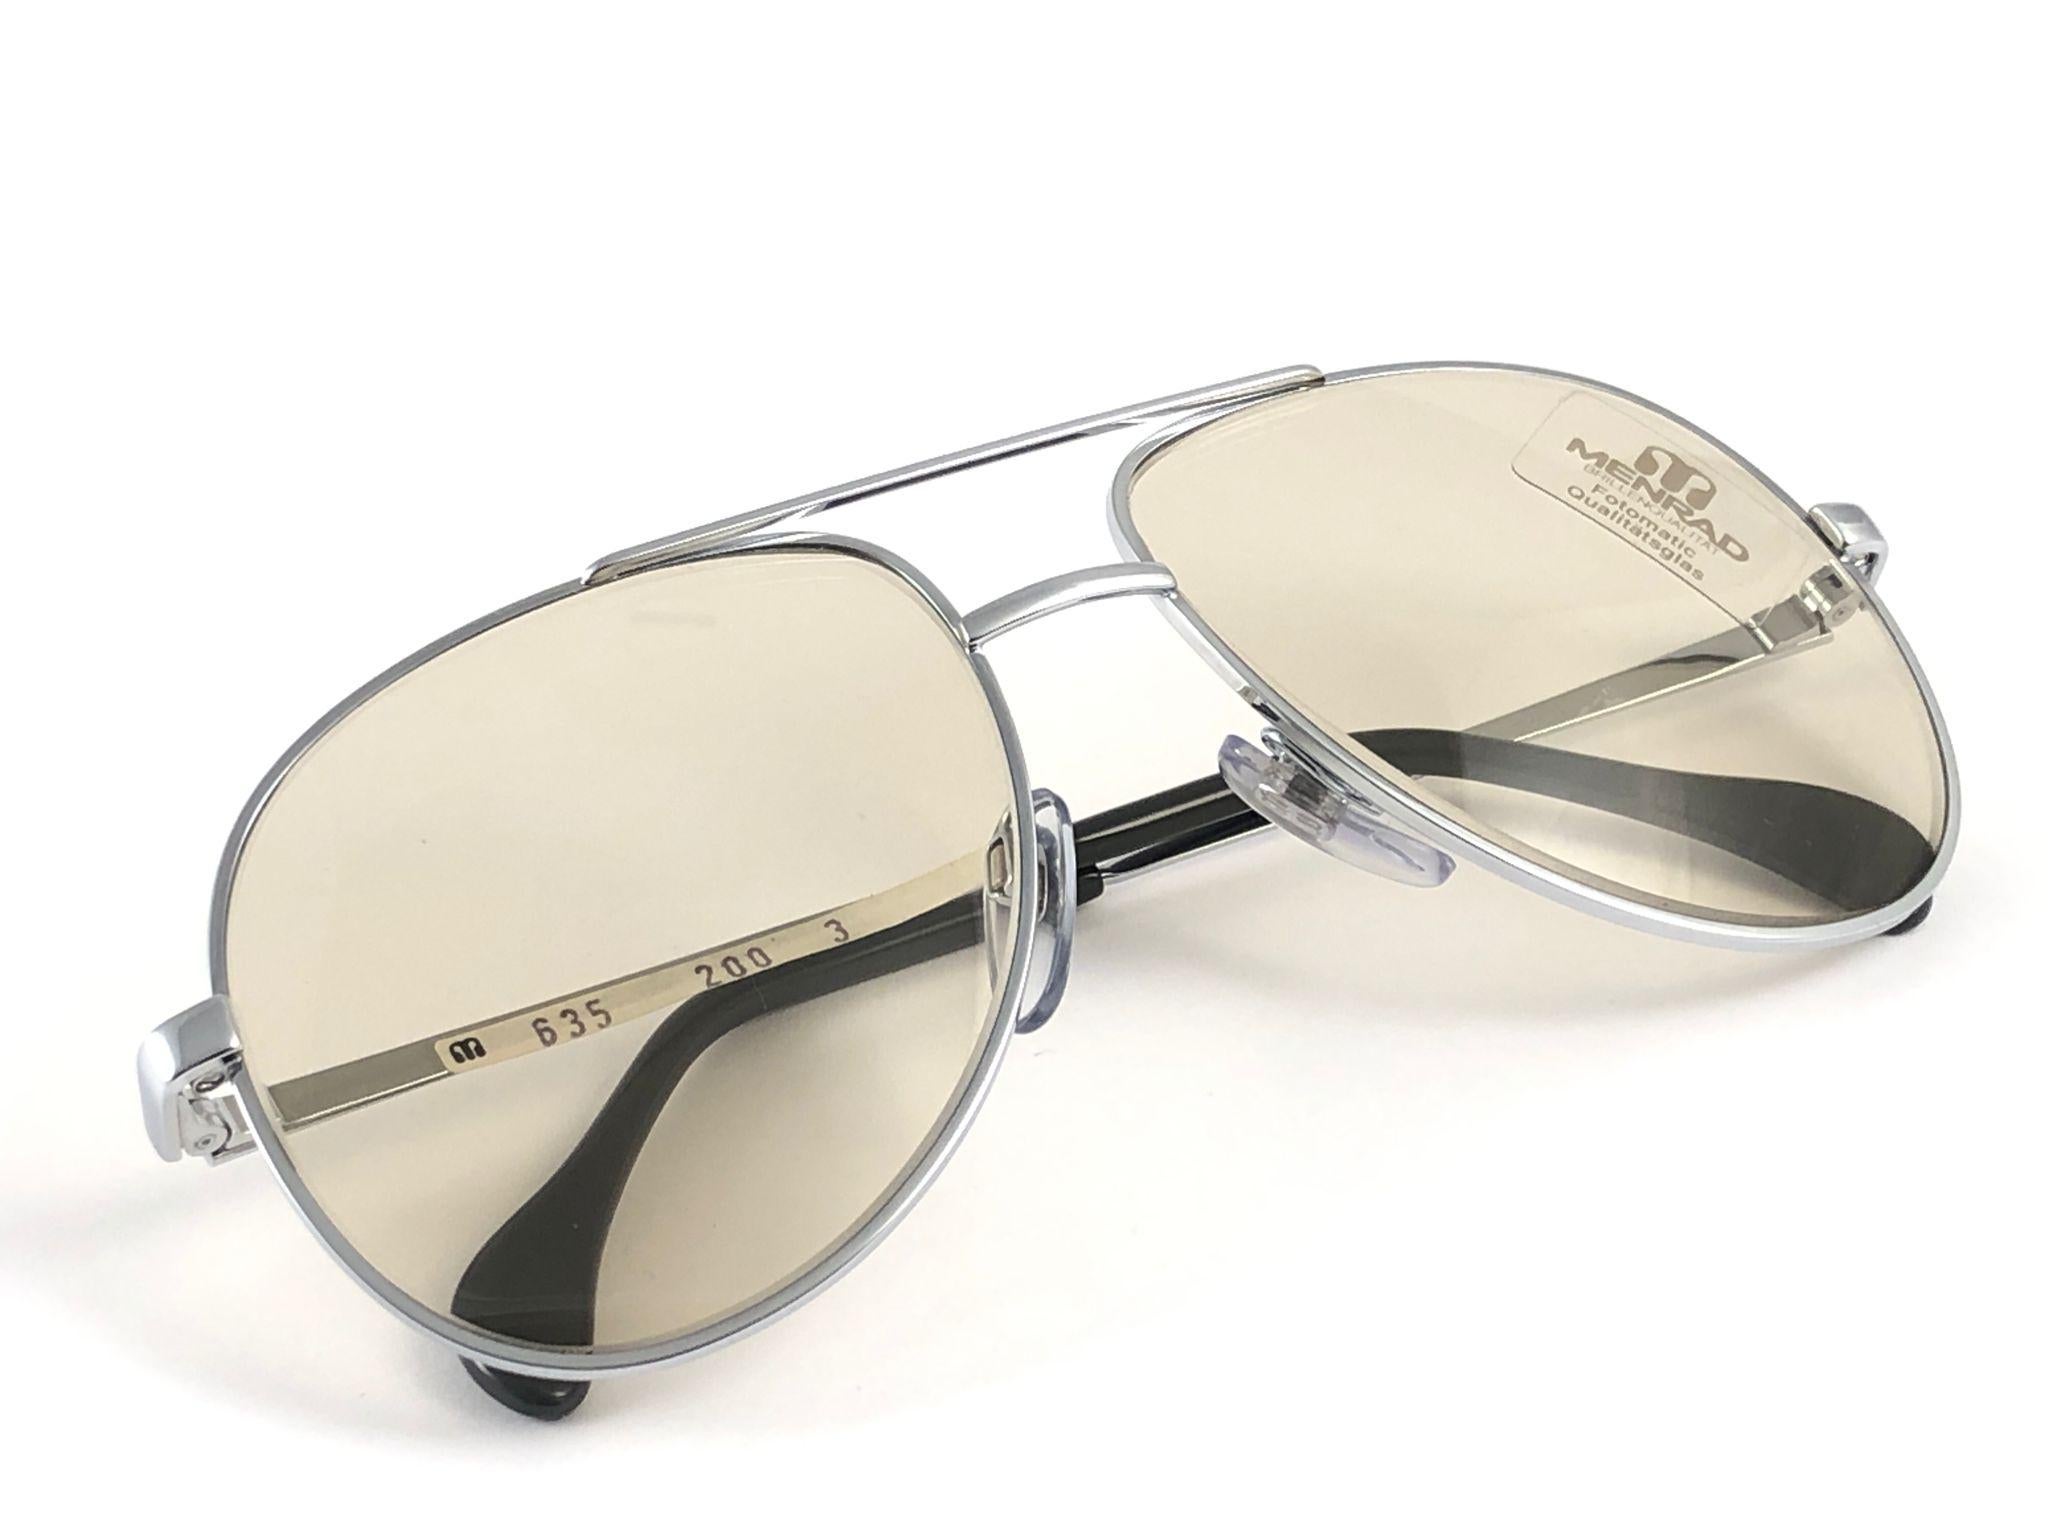 New Vintage Menrad M635 Silver Oversized Made in Germany 1970 Sunglasses  For Sale 2